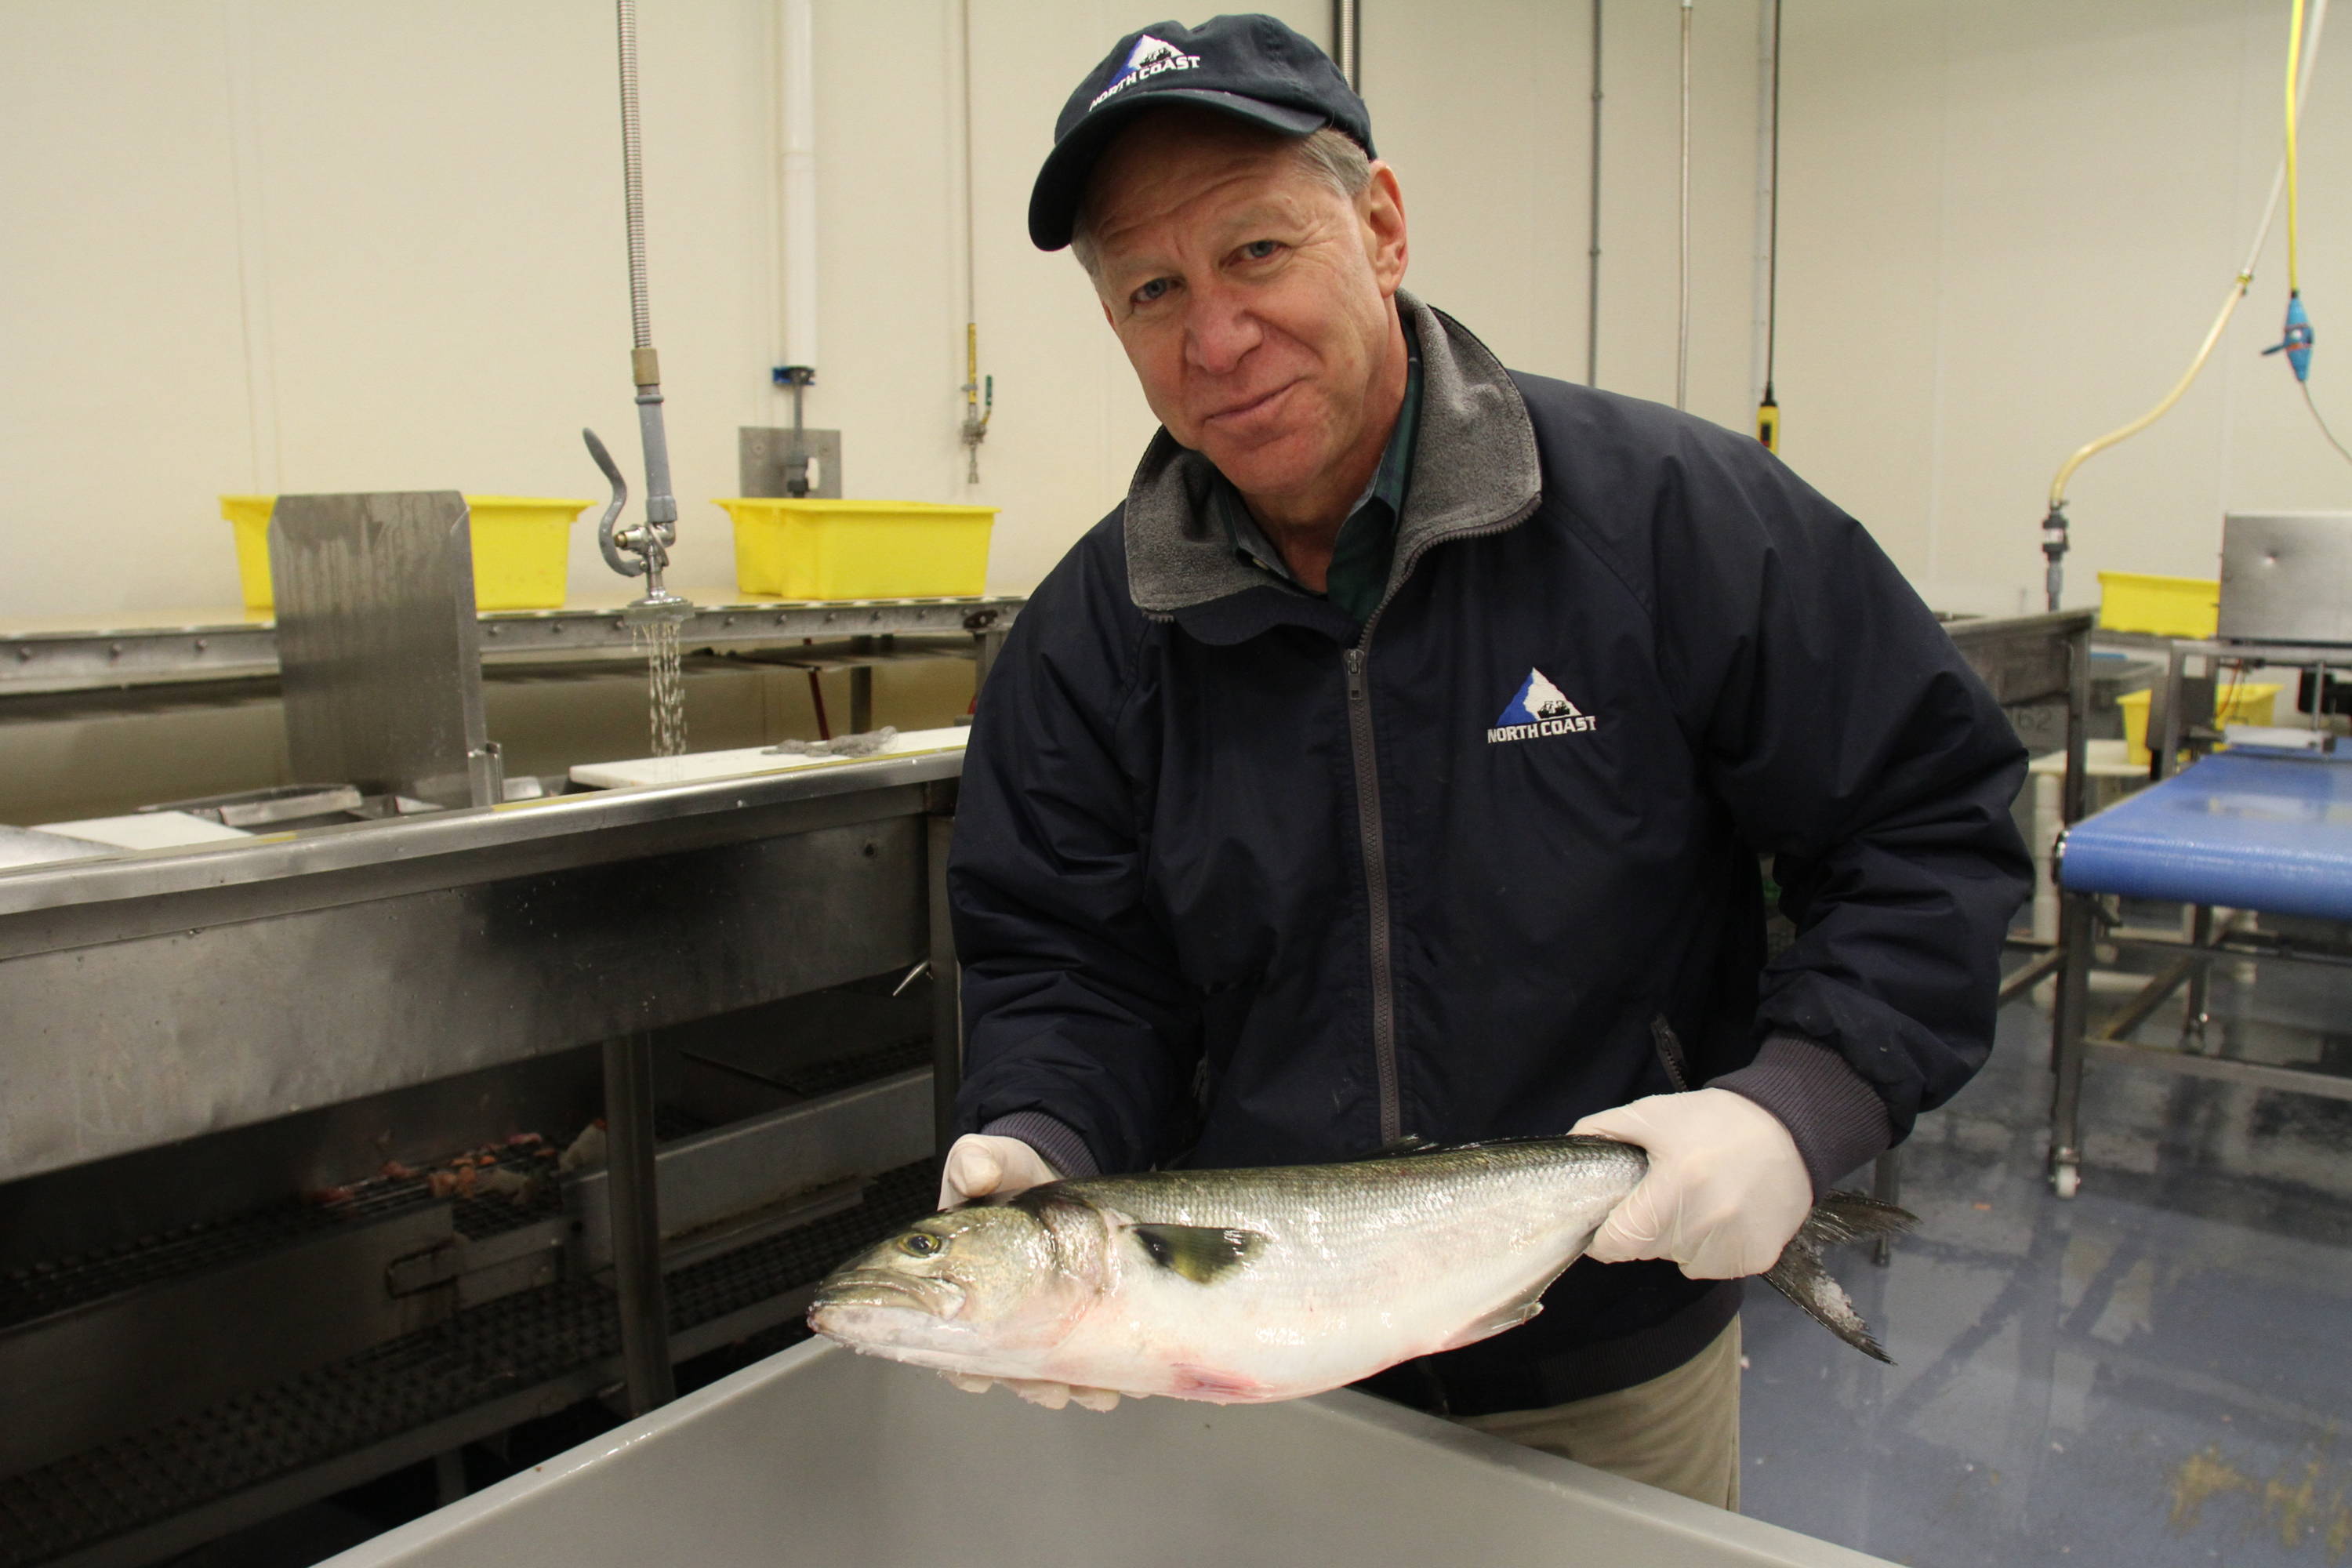 Norm Stavis holding a bluefish in North Coast Seafoods facility in Boston